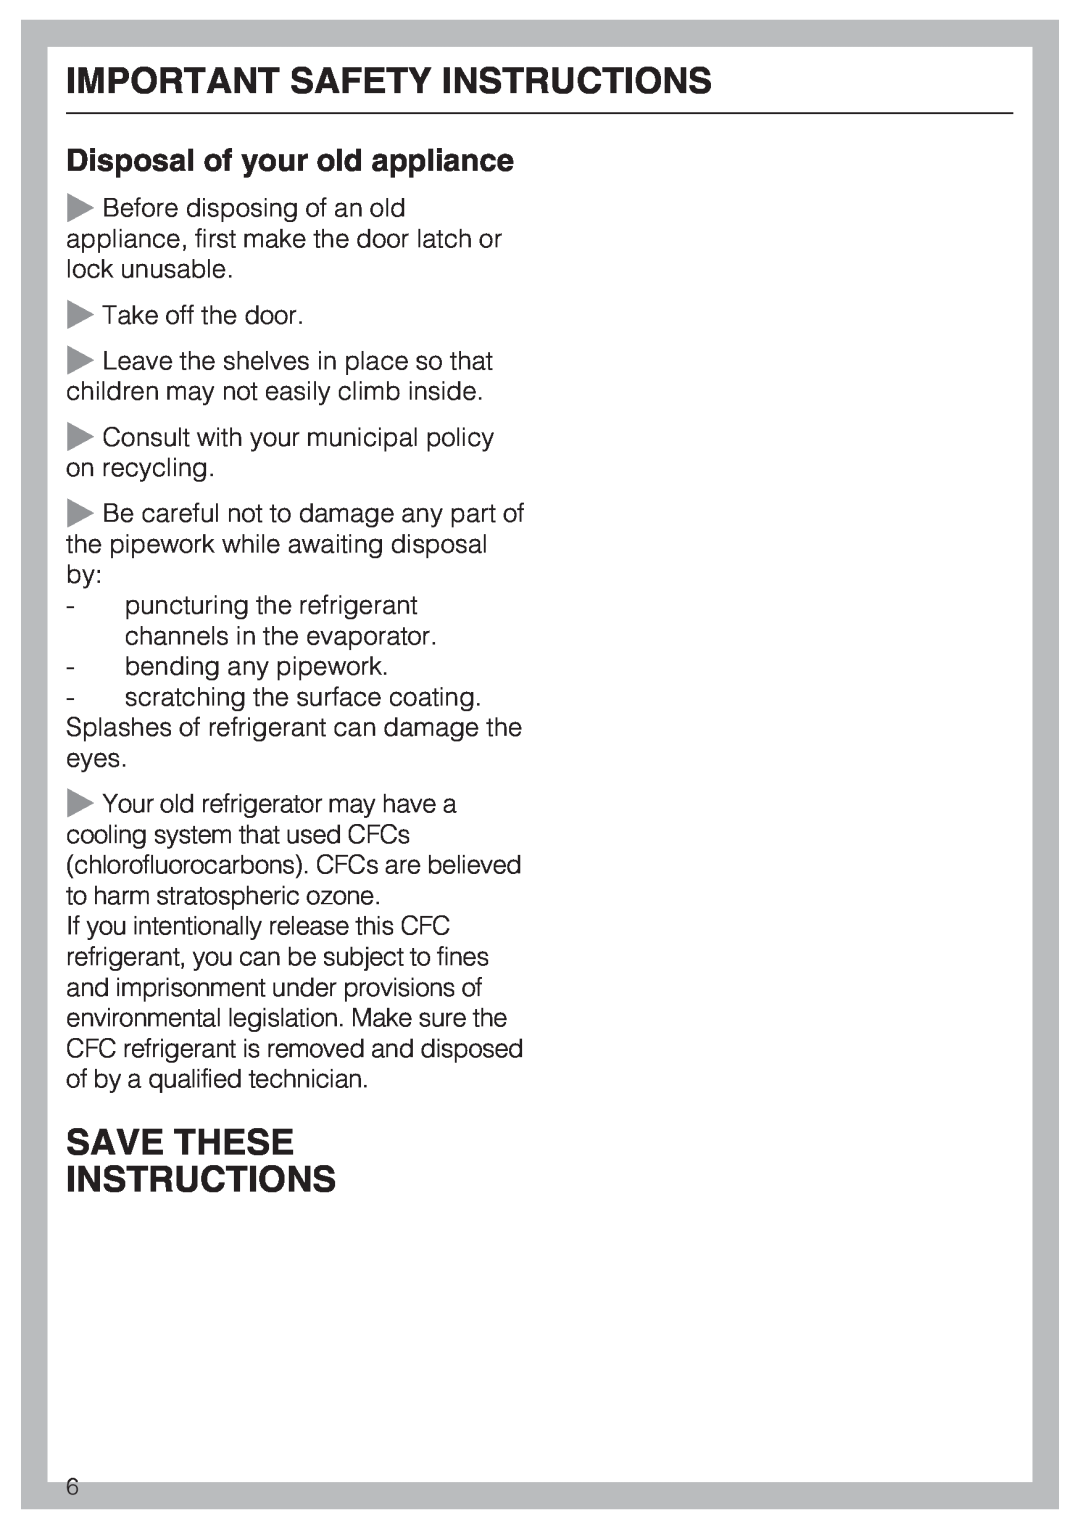 Miele KWT1611VI, KWT1601VI Save These Instructions, Disposal of your old appliance, Important Safety Instructions 